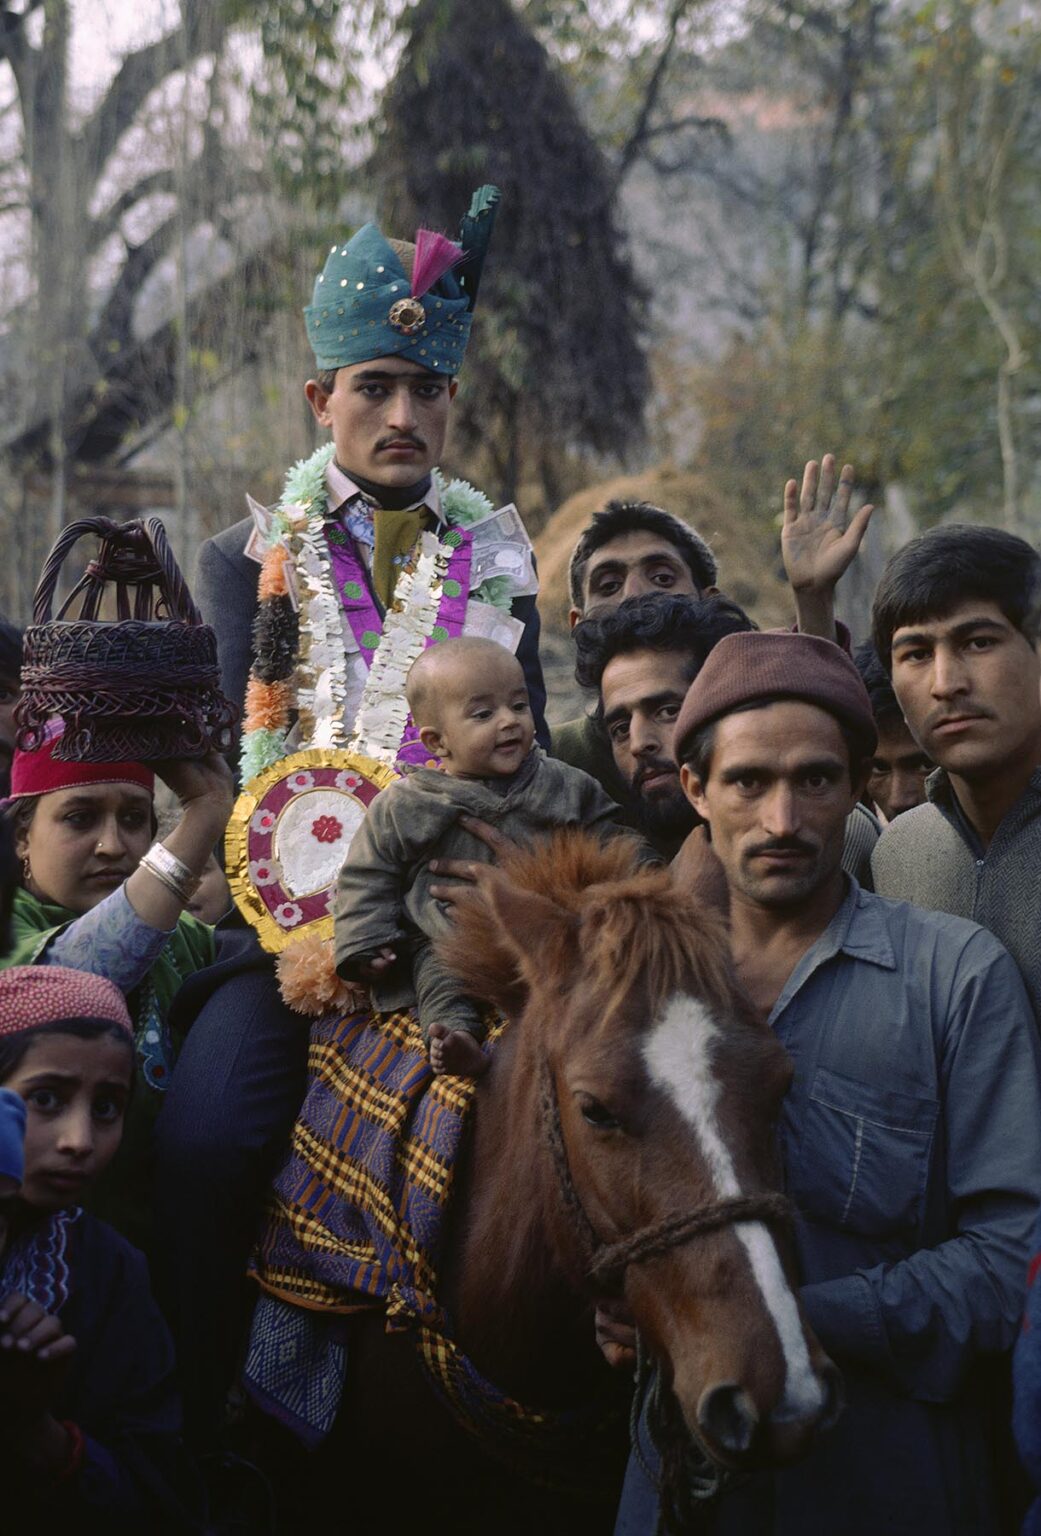 COSTUMED GROOM rides a HORSE to his brides home in AFAN VILLAGE during his WEDDING - KASHMIR, INDIA